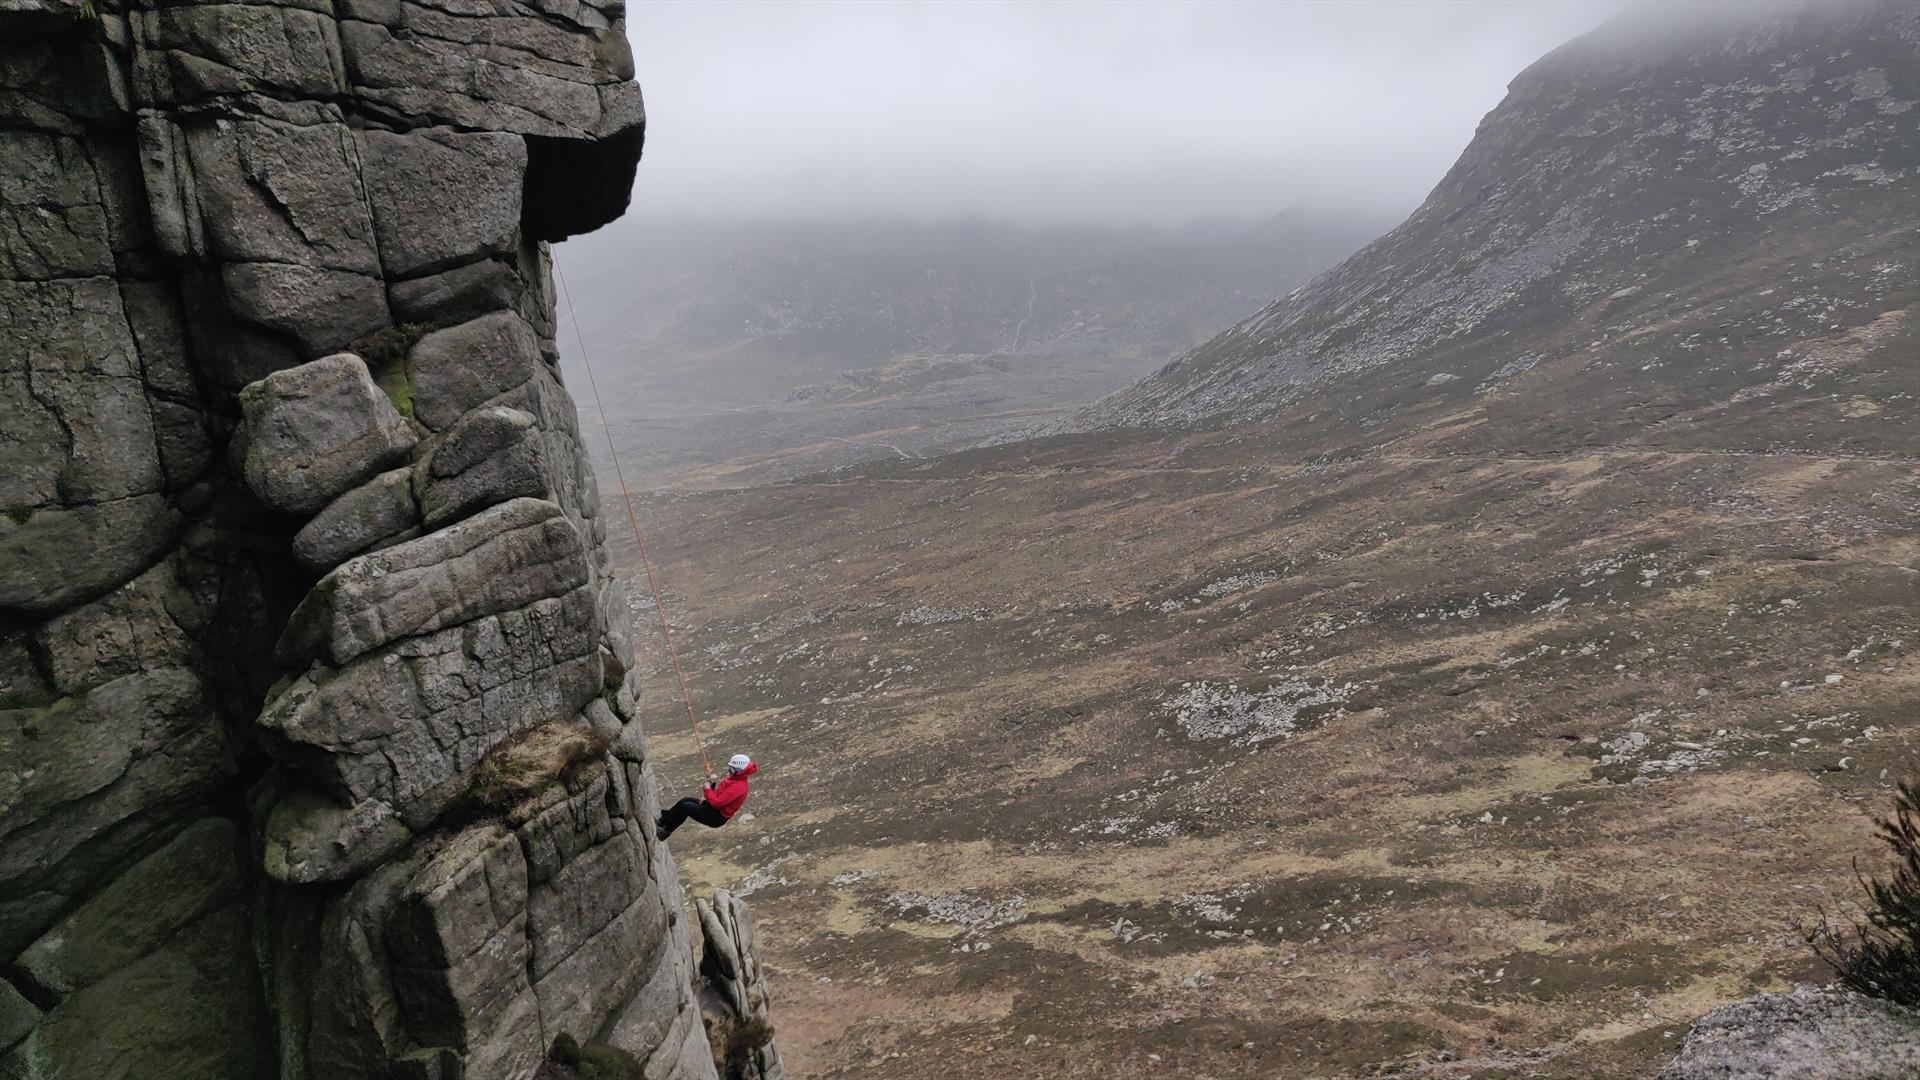 Great views while abseiling at Lower Cove, the Mournes